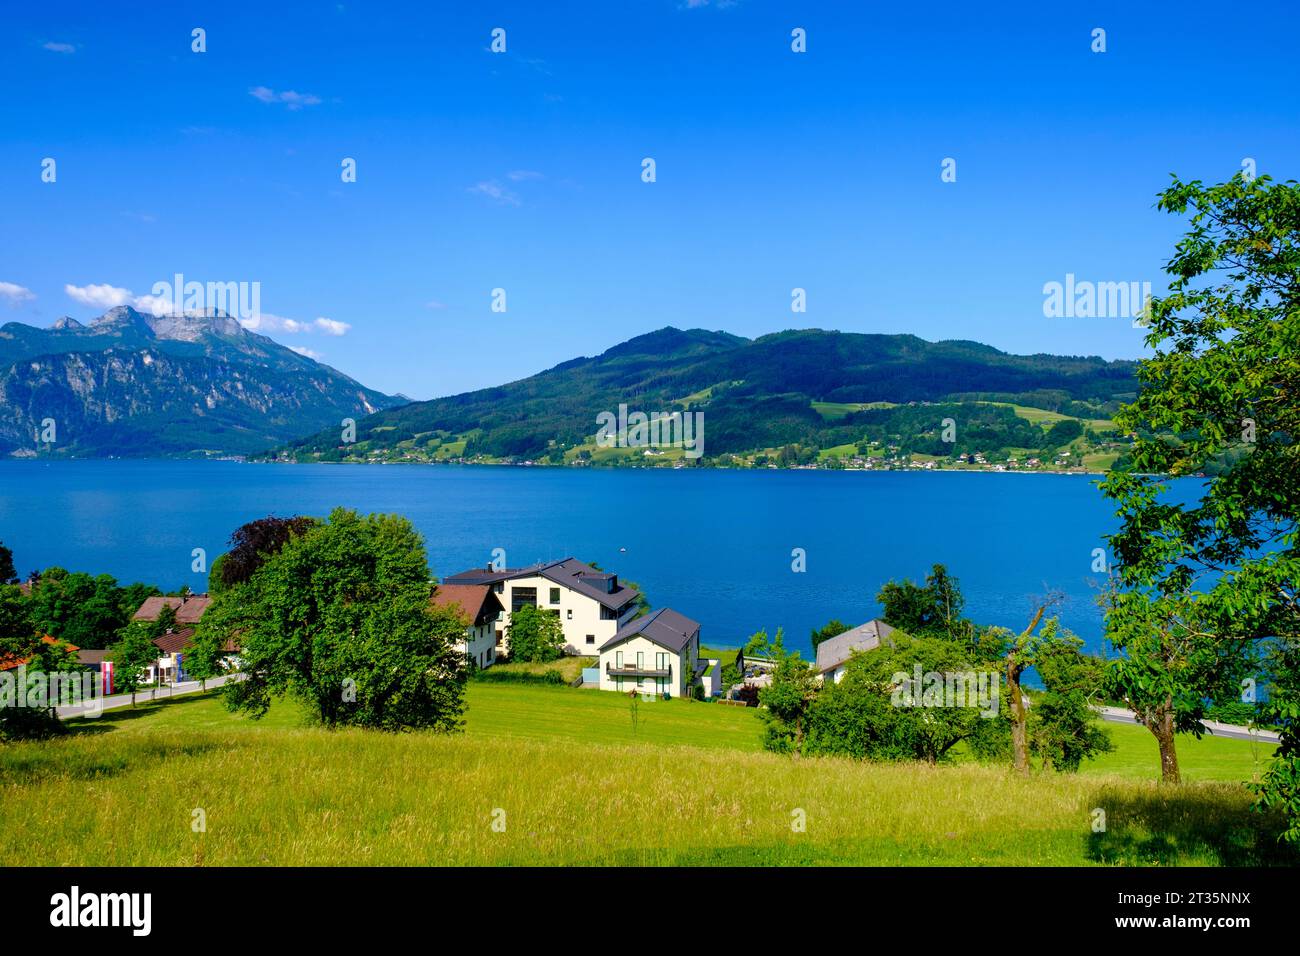 Austria, Upper Austria, Steinbach am Attersee, Village on shore of Attersee lake in summer Stock Photo